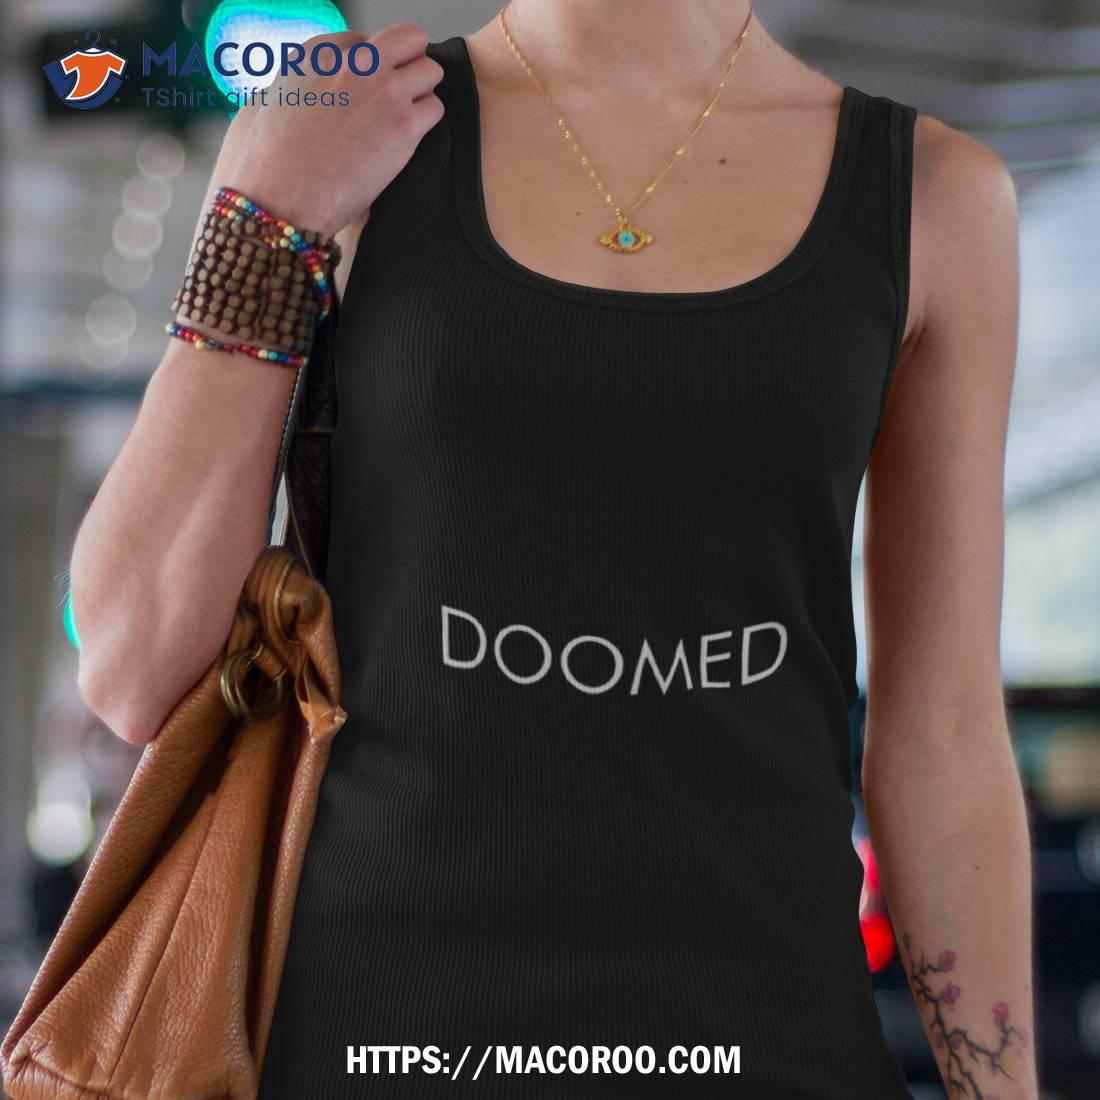 Moses Sumney Official Merchandise Doomed T Shirt